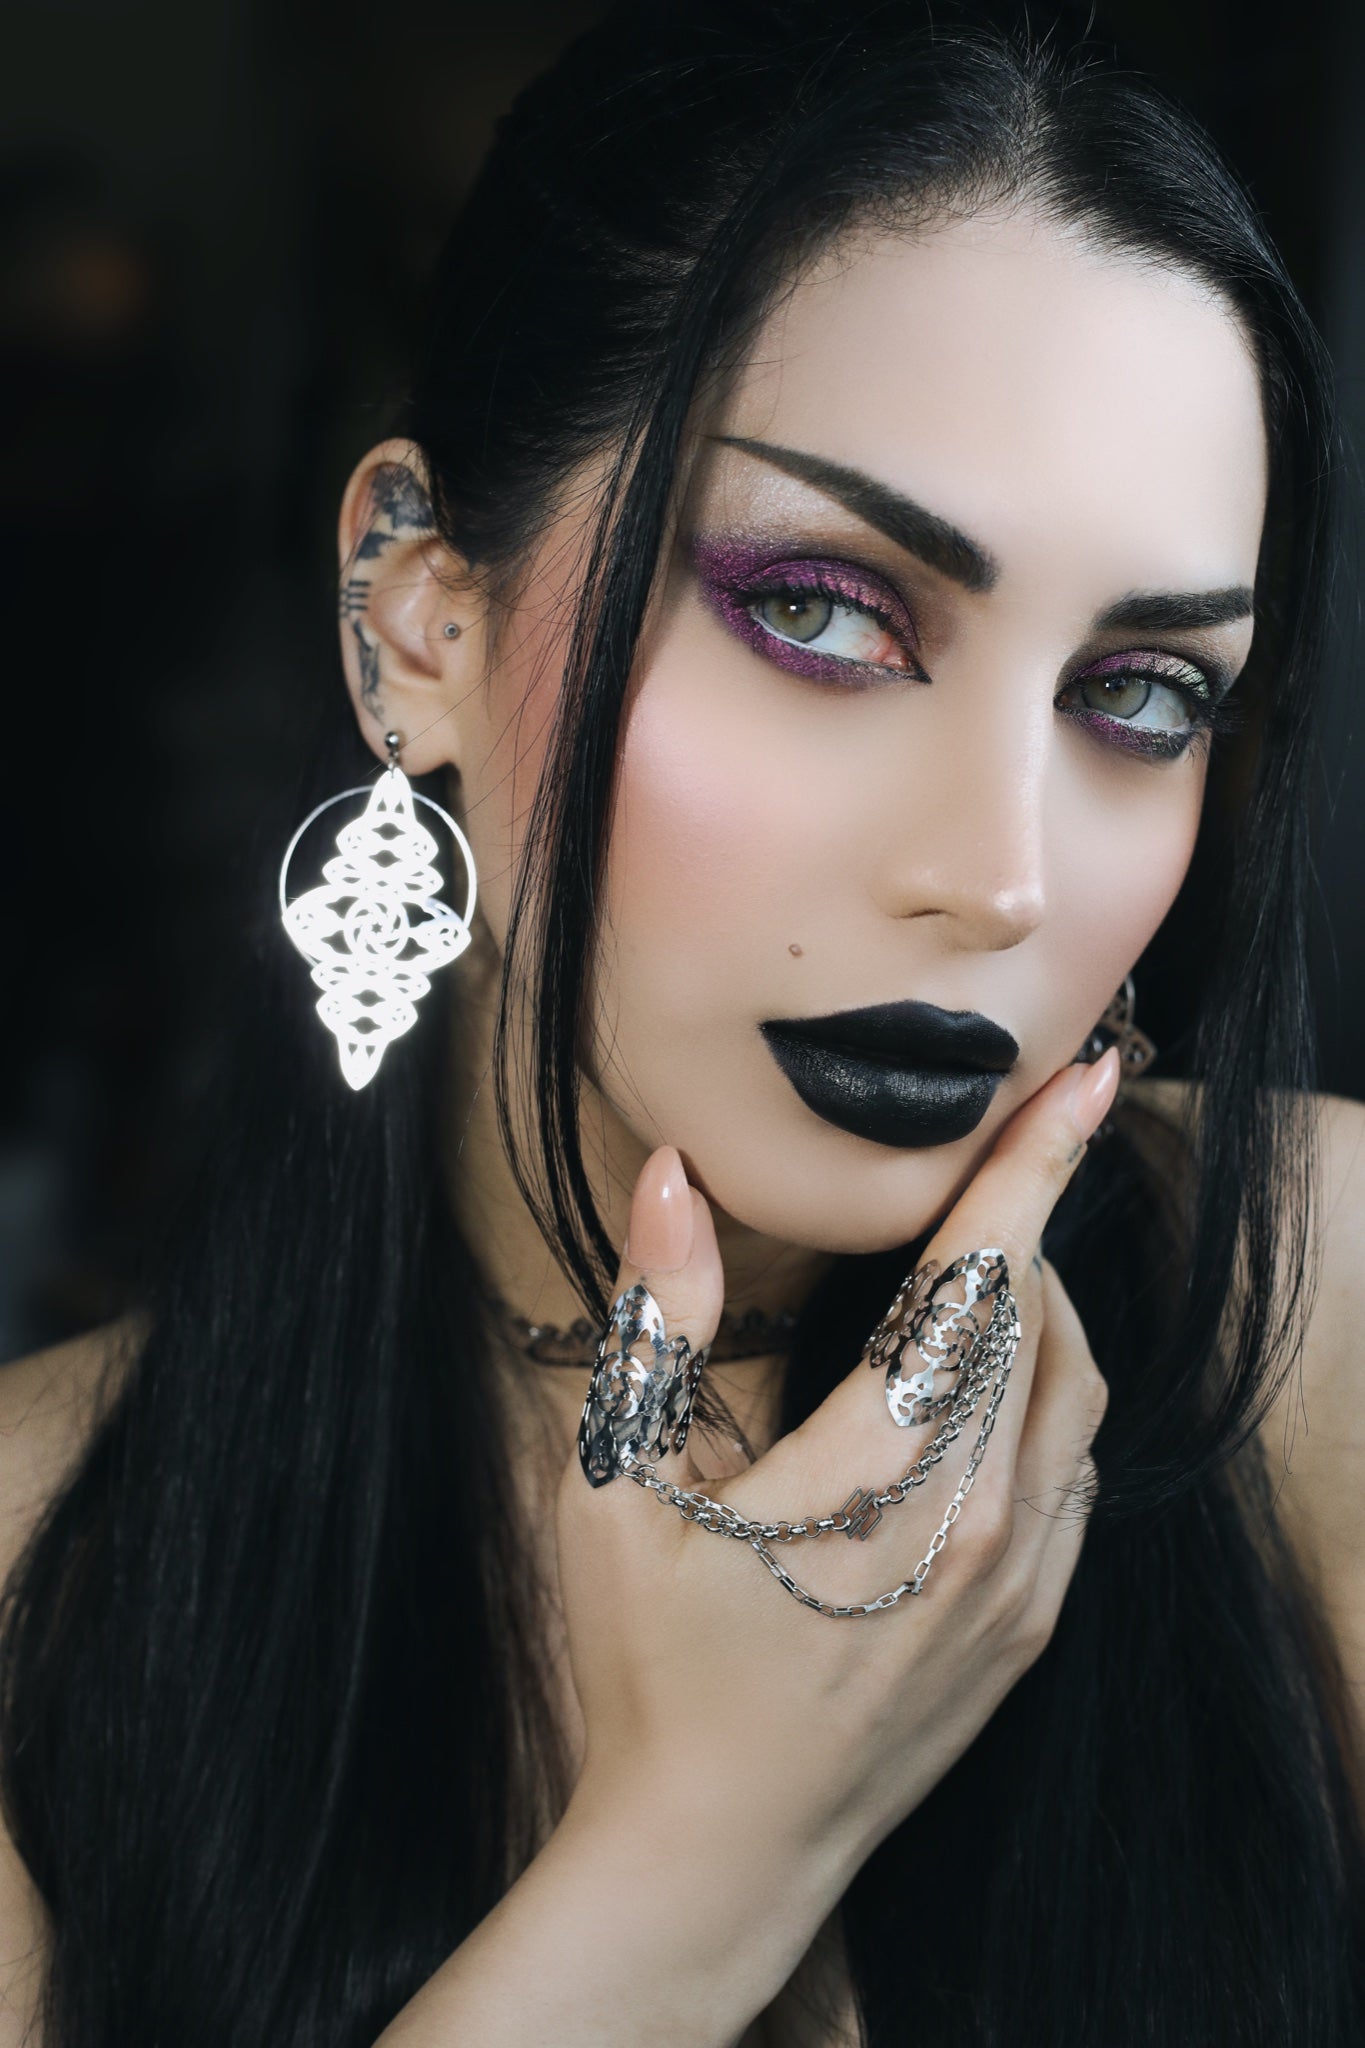 A striking gothic model showcases Myril Jewels' intricate accessories, featuring ornate silver earrings and matching rings. Her dramatic makeup, including deep black lipstick and vibrant purple eyeshadow, complements the bold, dark-avantgarde aesthetic of the jewelry, ideal for festival wear or as a statement piece in a goth-chic ensemble.